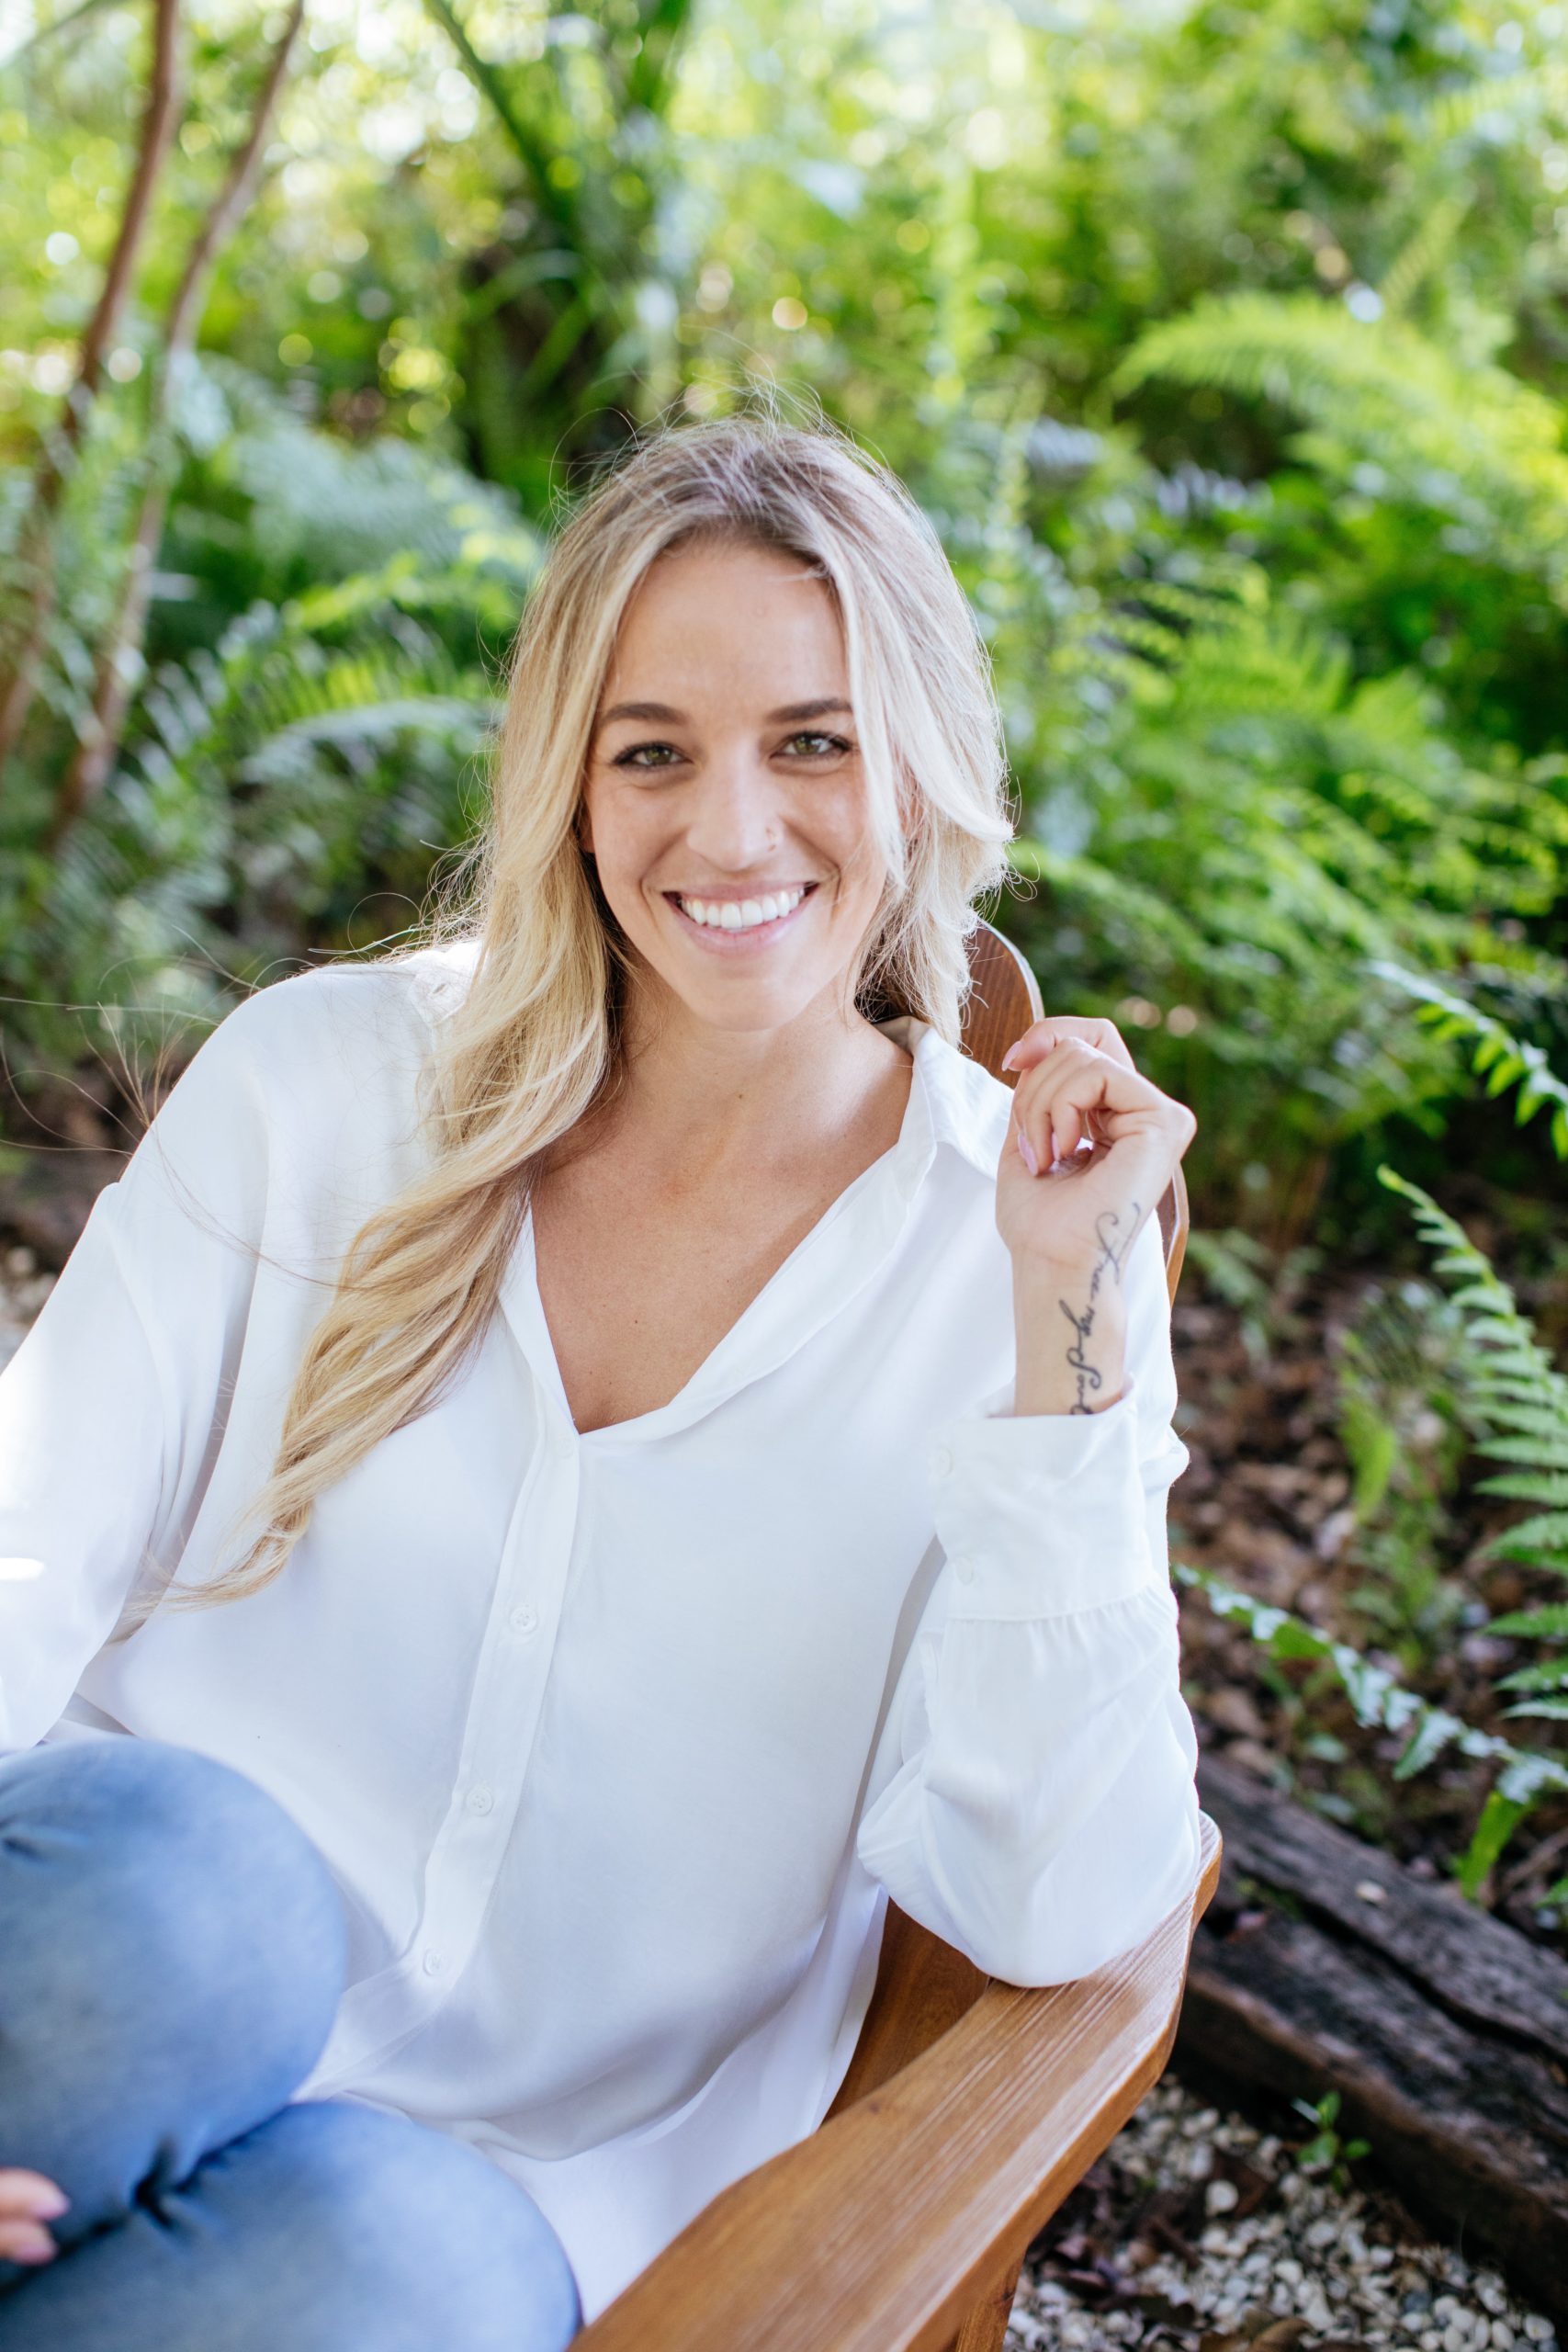 Tampa Bay Realtor Alexandra Valencia. Click here to get inspired by this realtor's relaxed and personal branding photoshoot!